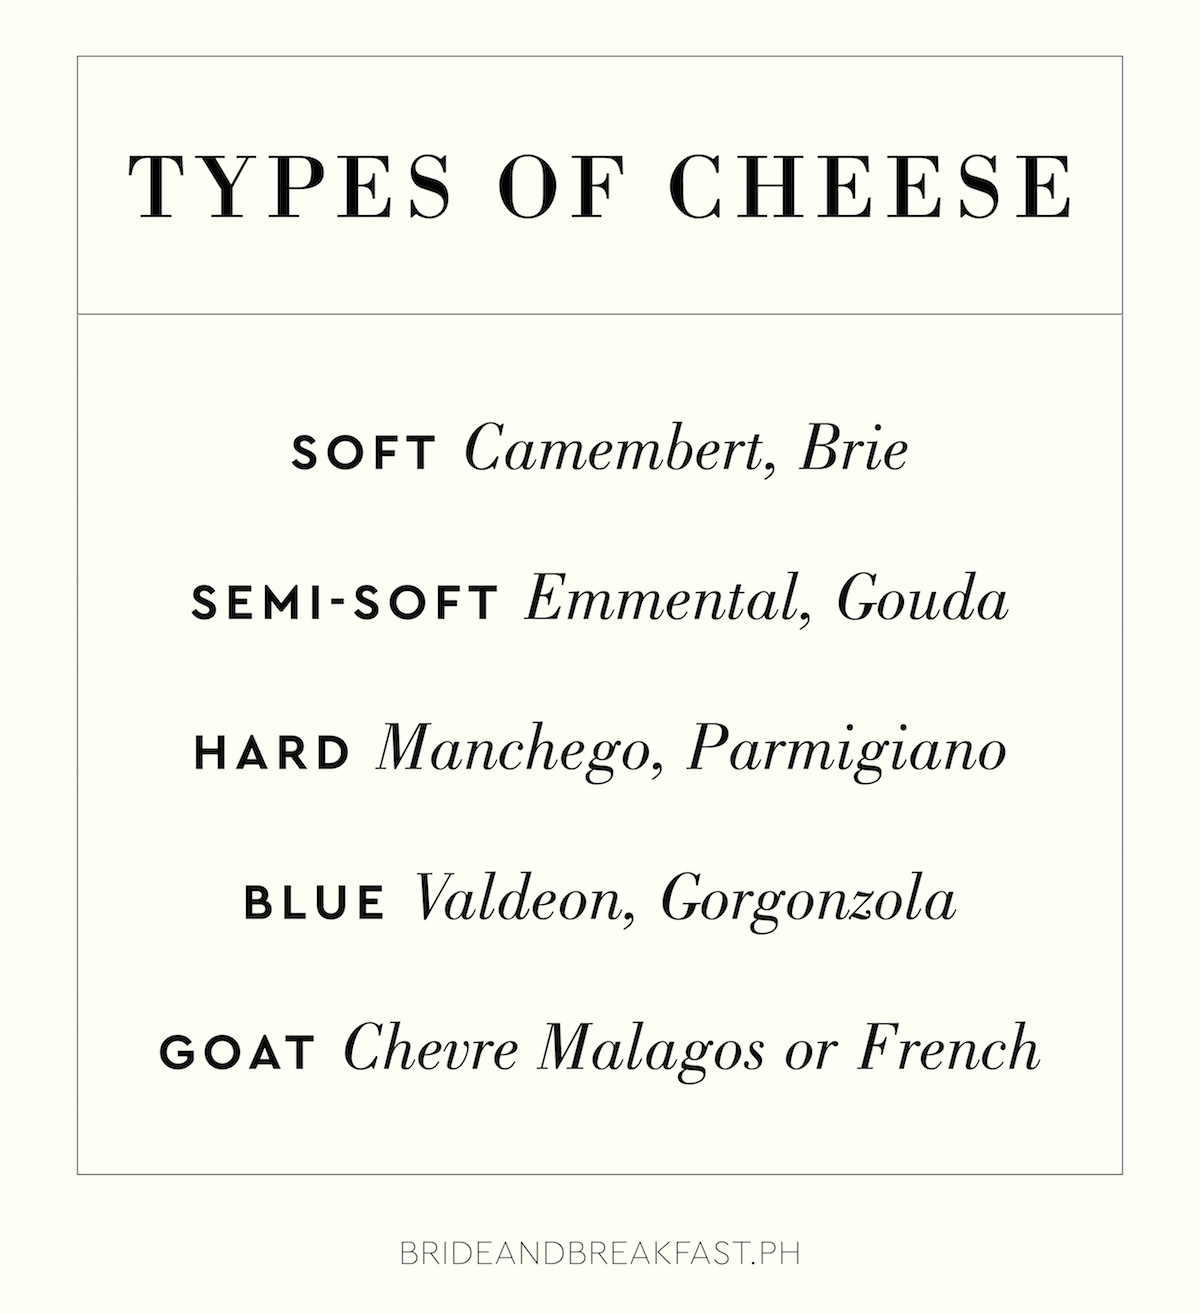 Types of Cheese Soft Camembert, Brie Semi-Soft Emmental, Gouda Hard Manchego, Parmigiano, Blue Valdeon, Gorgonzola Goat Chevre Malagos or French